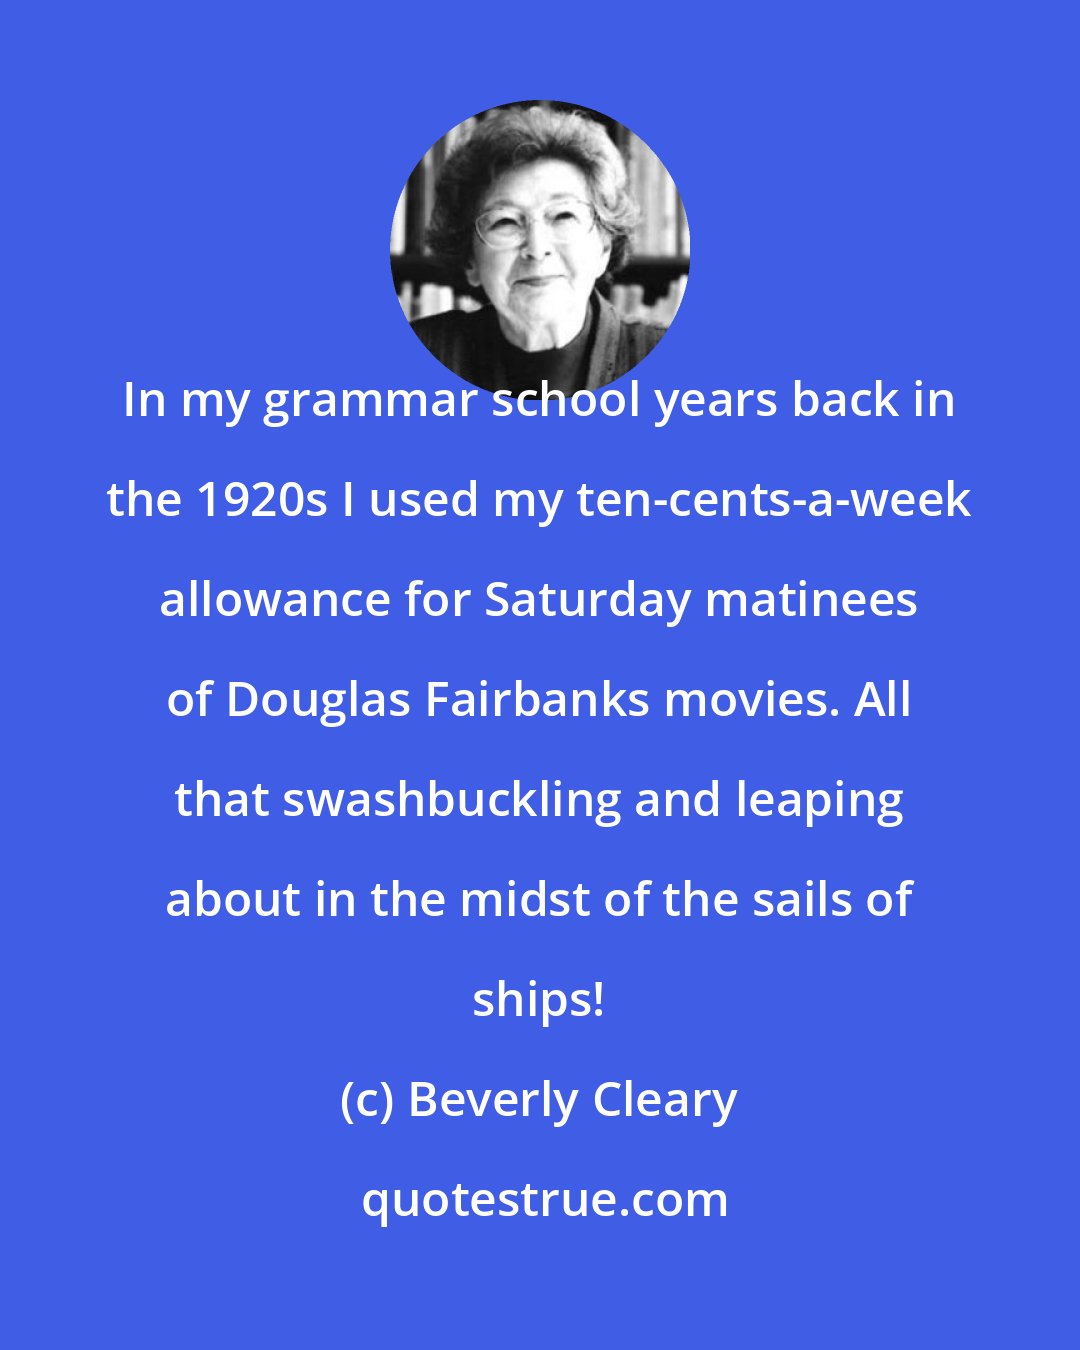 Beverly Cleary: In my grammar school years back in the 1920s I used my ten-cents-a-week allowance for Saturday matinees of Douglas Fairbanks movies. All that swashbuckling and leaping about in the midst of the sails of ships!